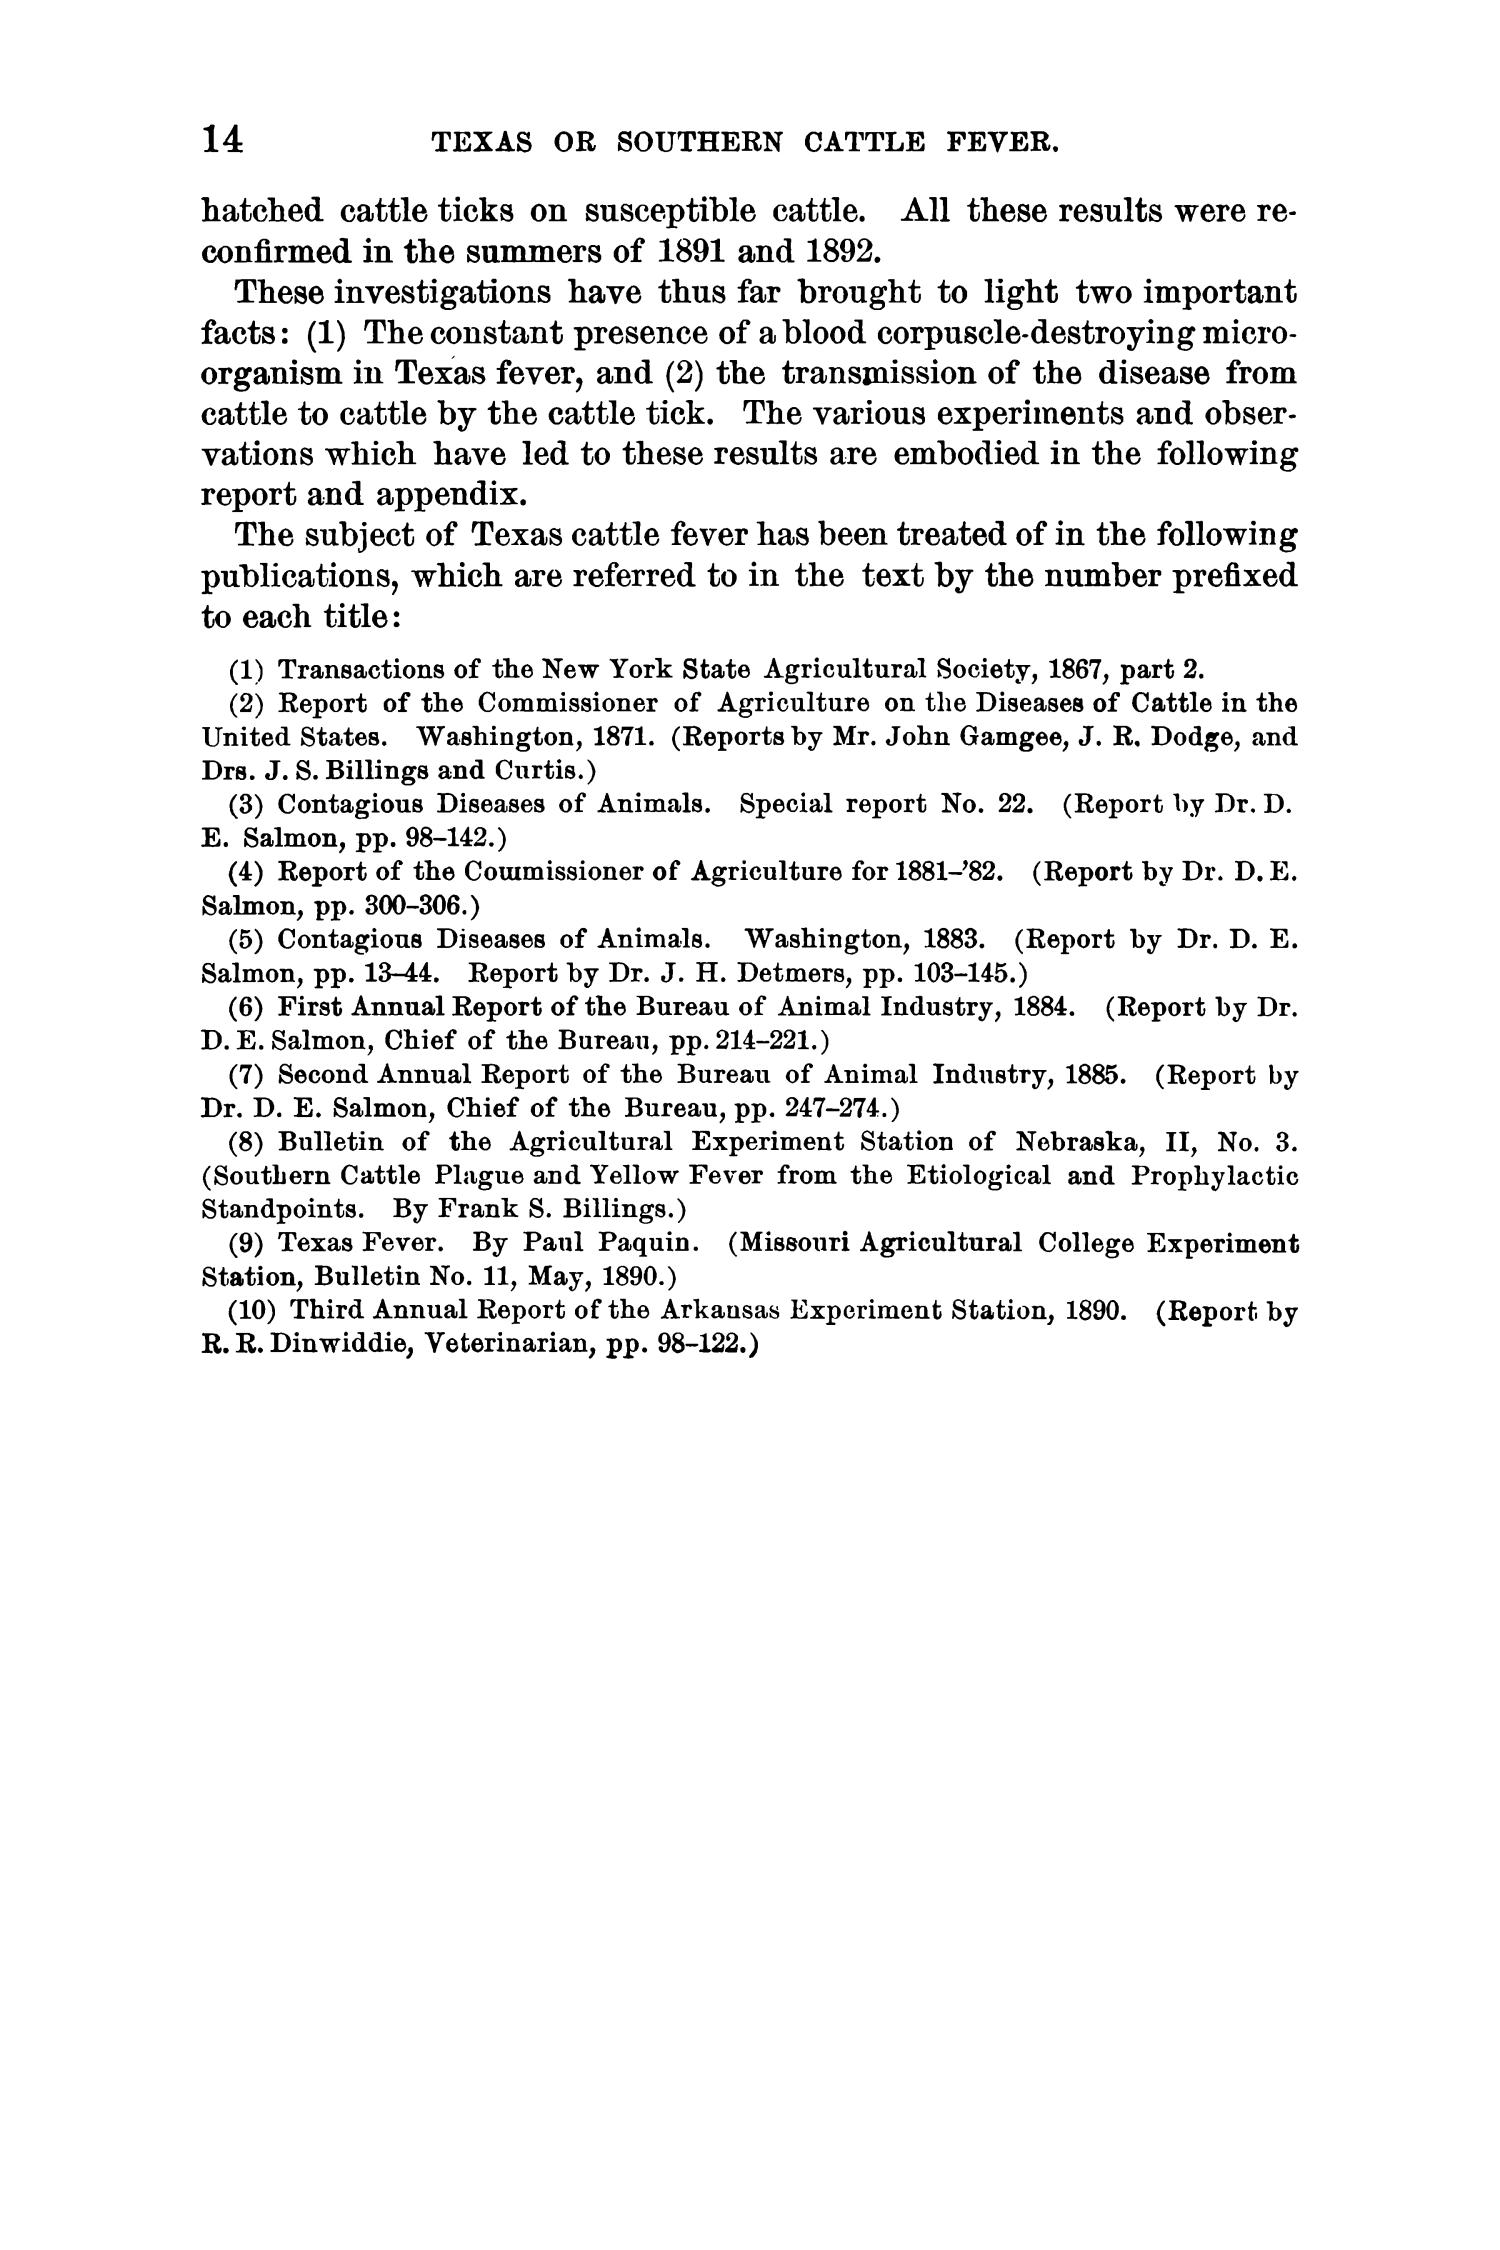 Investigations into the Nature, Causation, and Prevention of Texas or Southern Cattle Fever
                                                
                                                    14
                                                